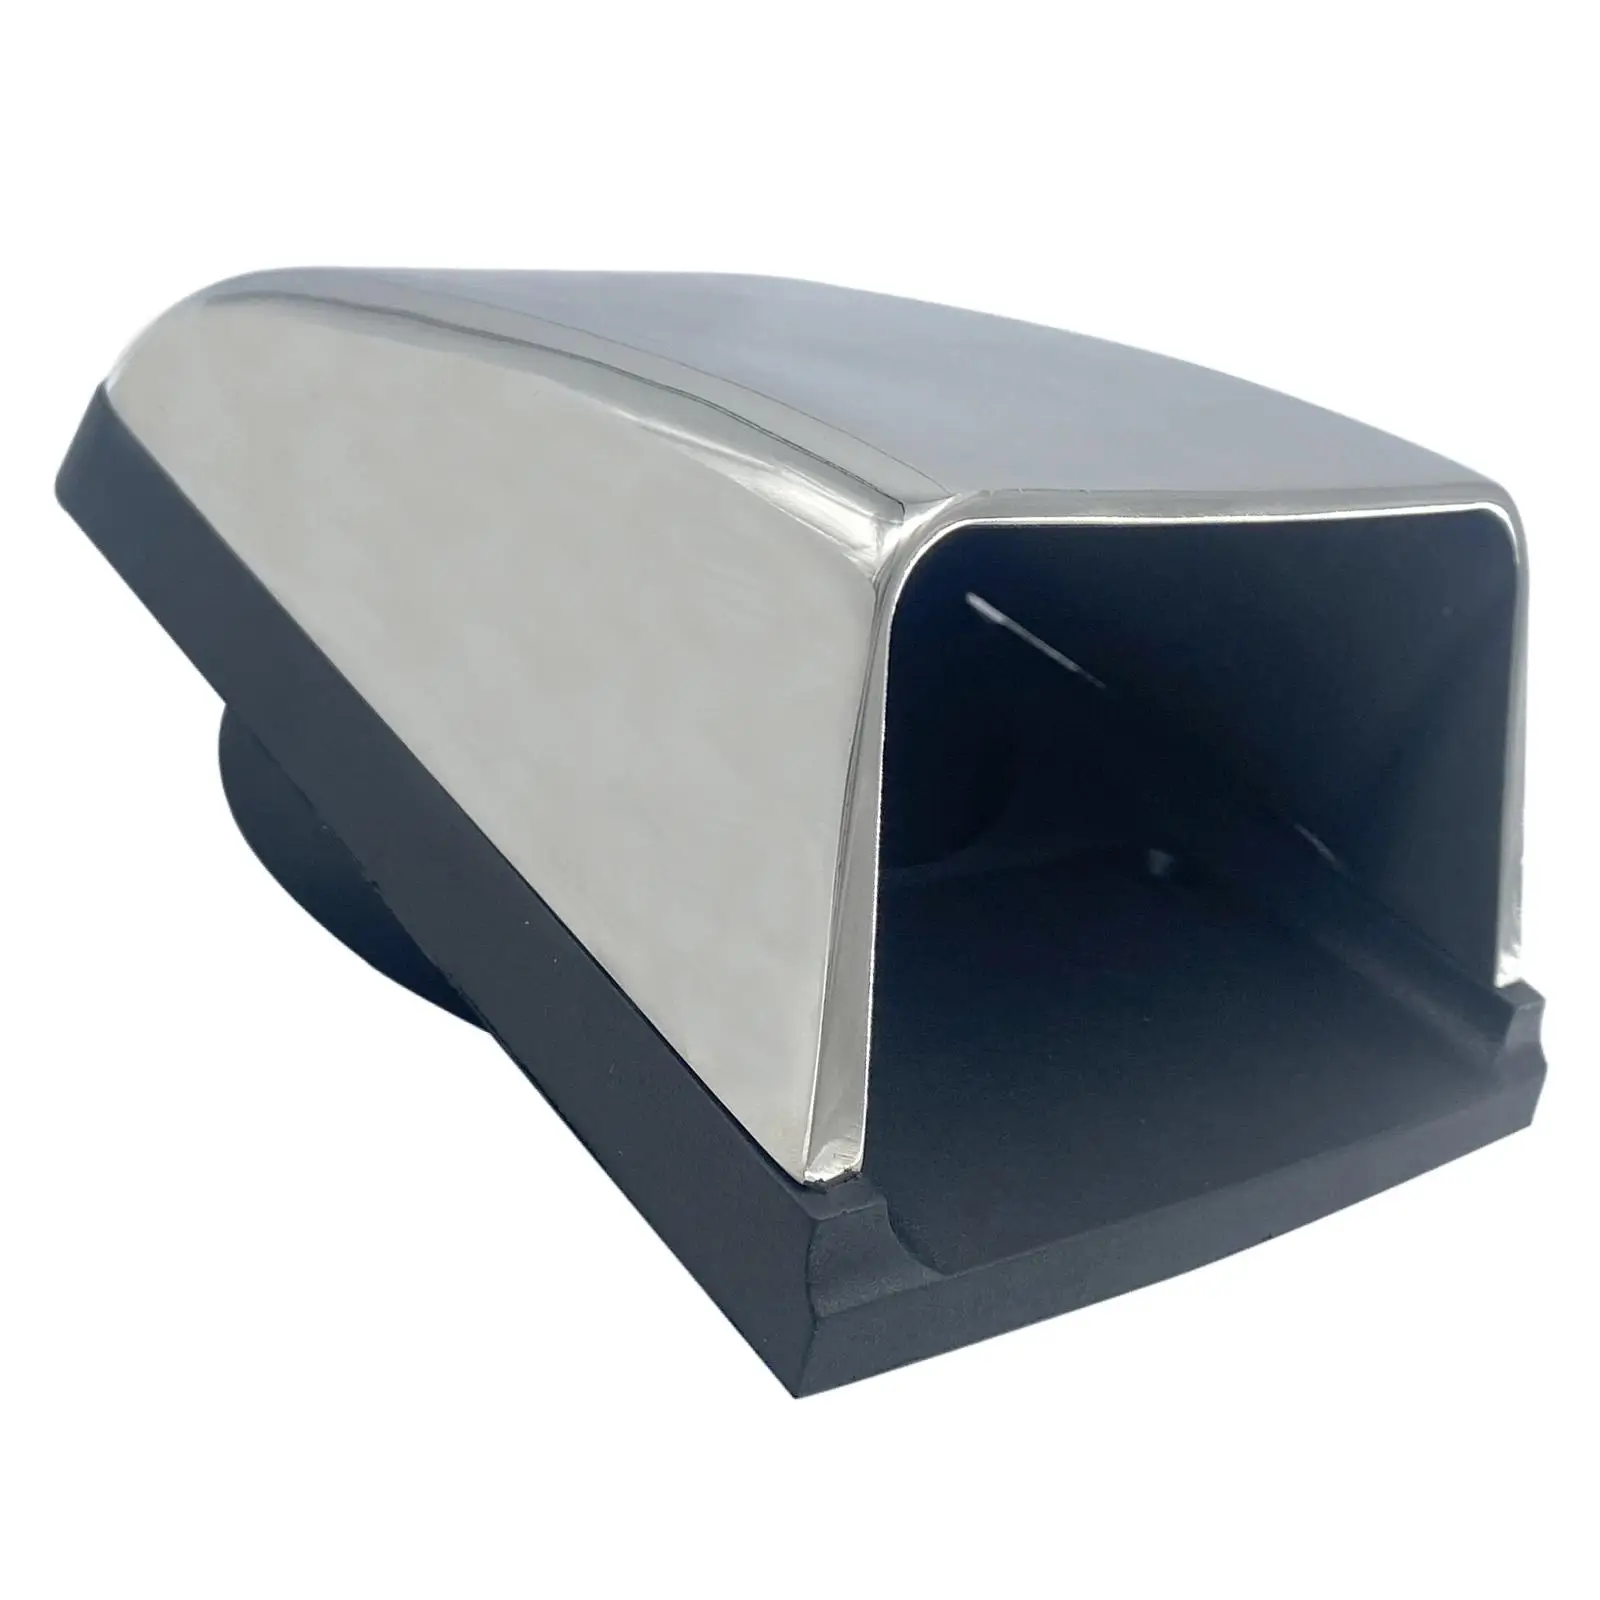 

Marine Intake Exhaust Cowl Ventilator Air Vent Cover Airflow 3.23inch Vent Box Ventilation Equipment for Ship Dinghy Yacht